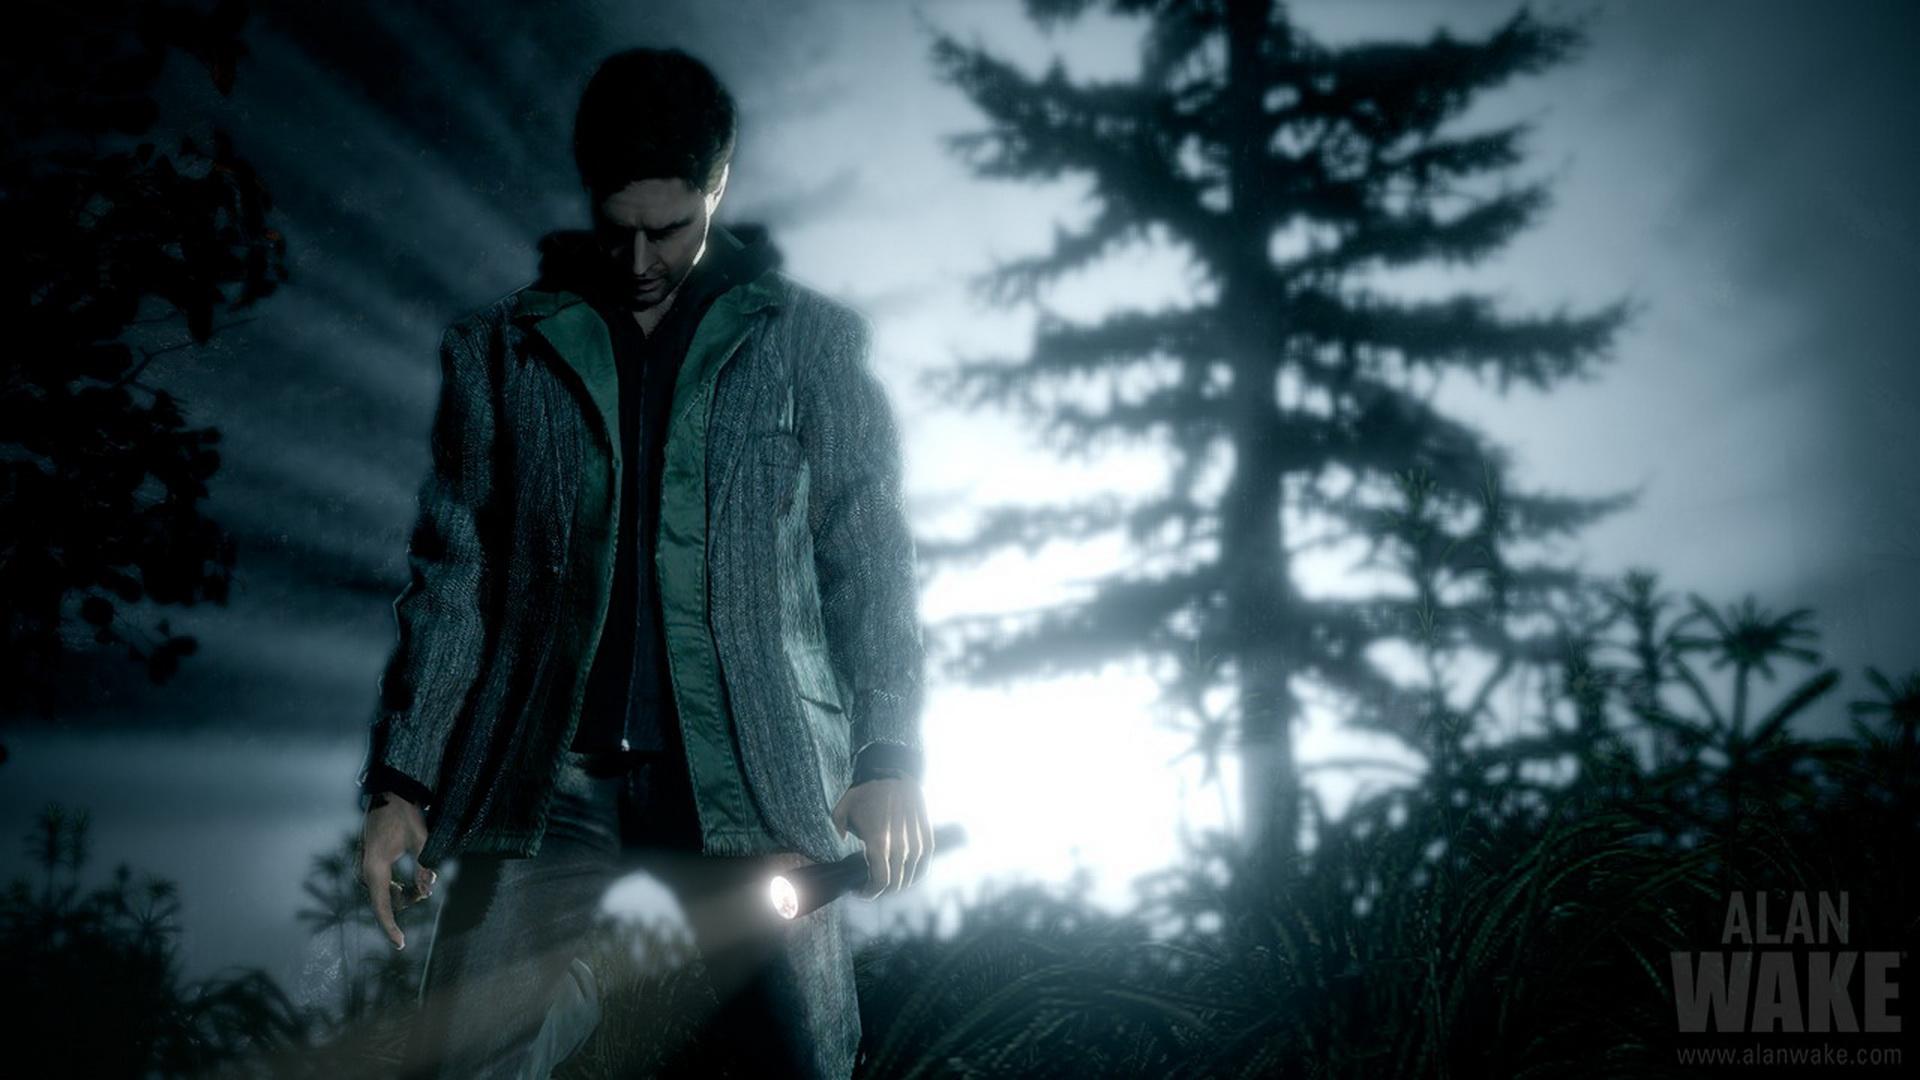 Listings hint an 'Alan Wake' remaster is coming to PS5 and Xbox